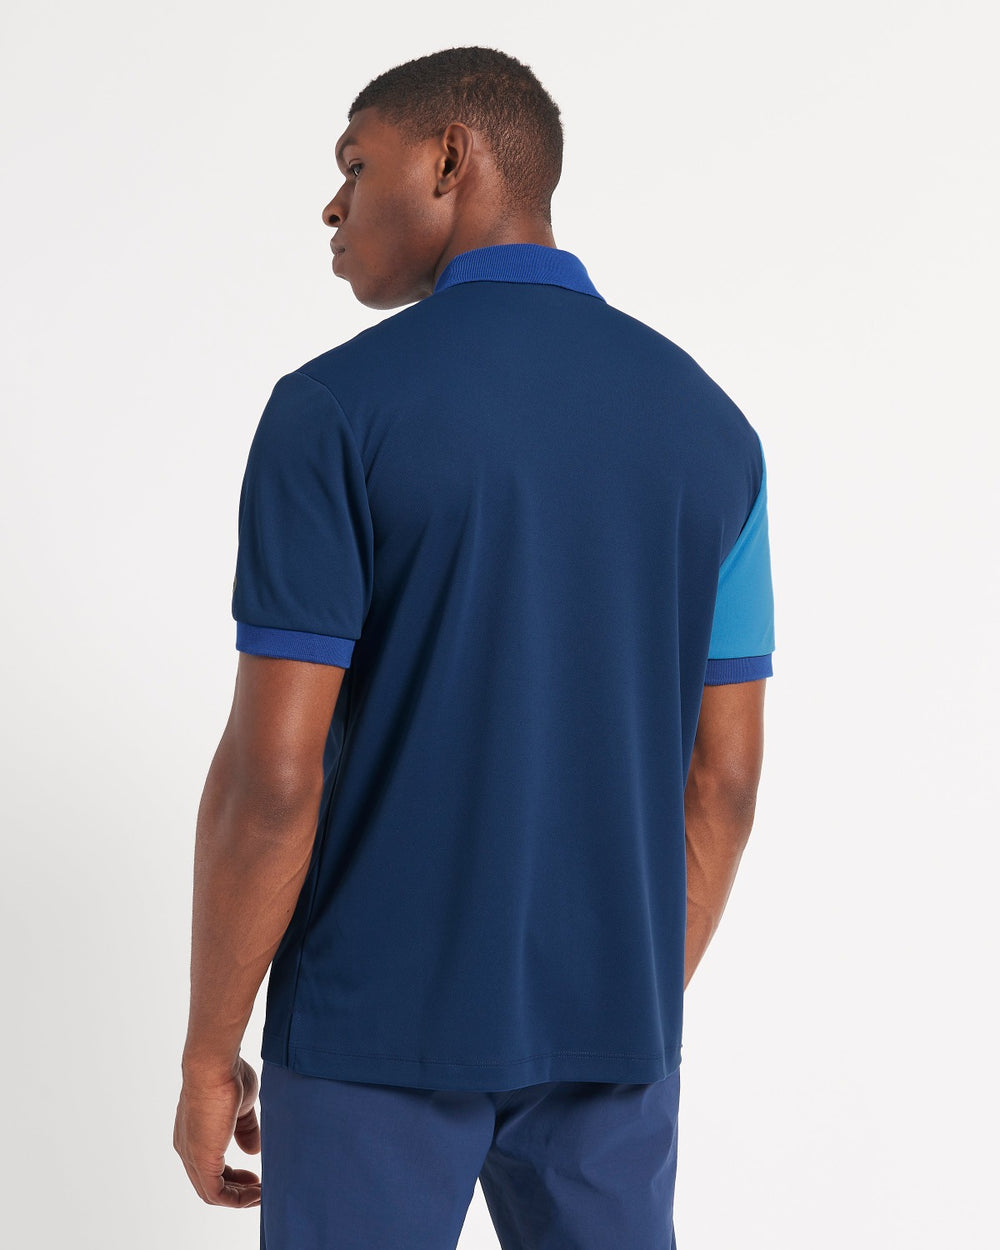 360 Motion Stretch Colorblock Polo - Blue/Navy